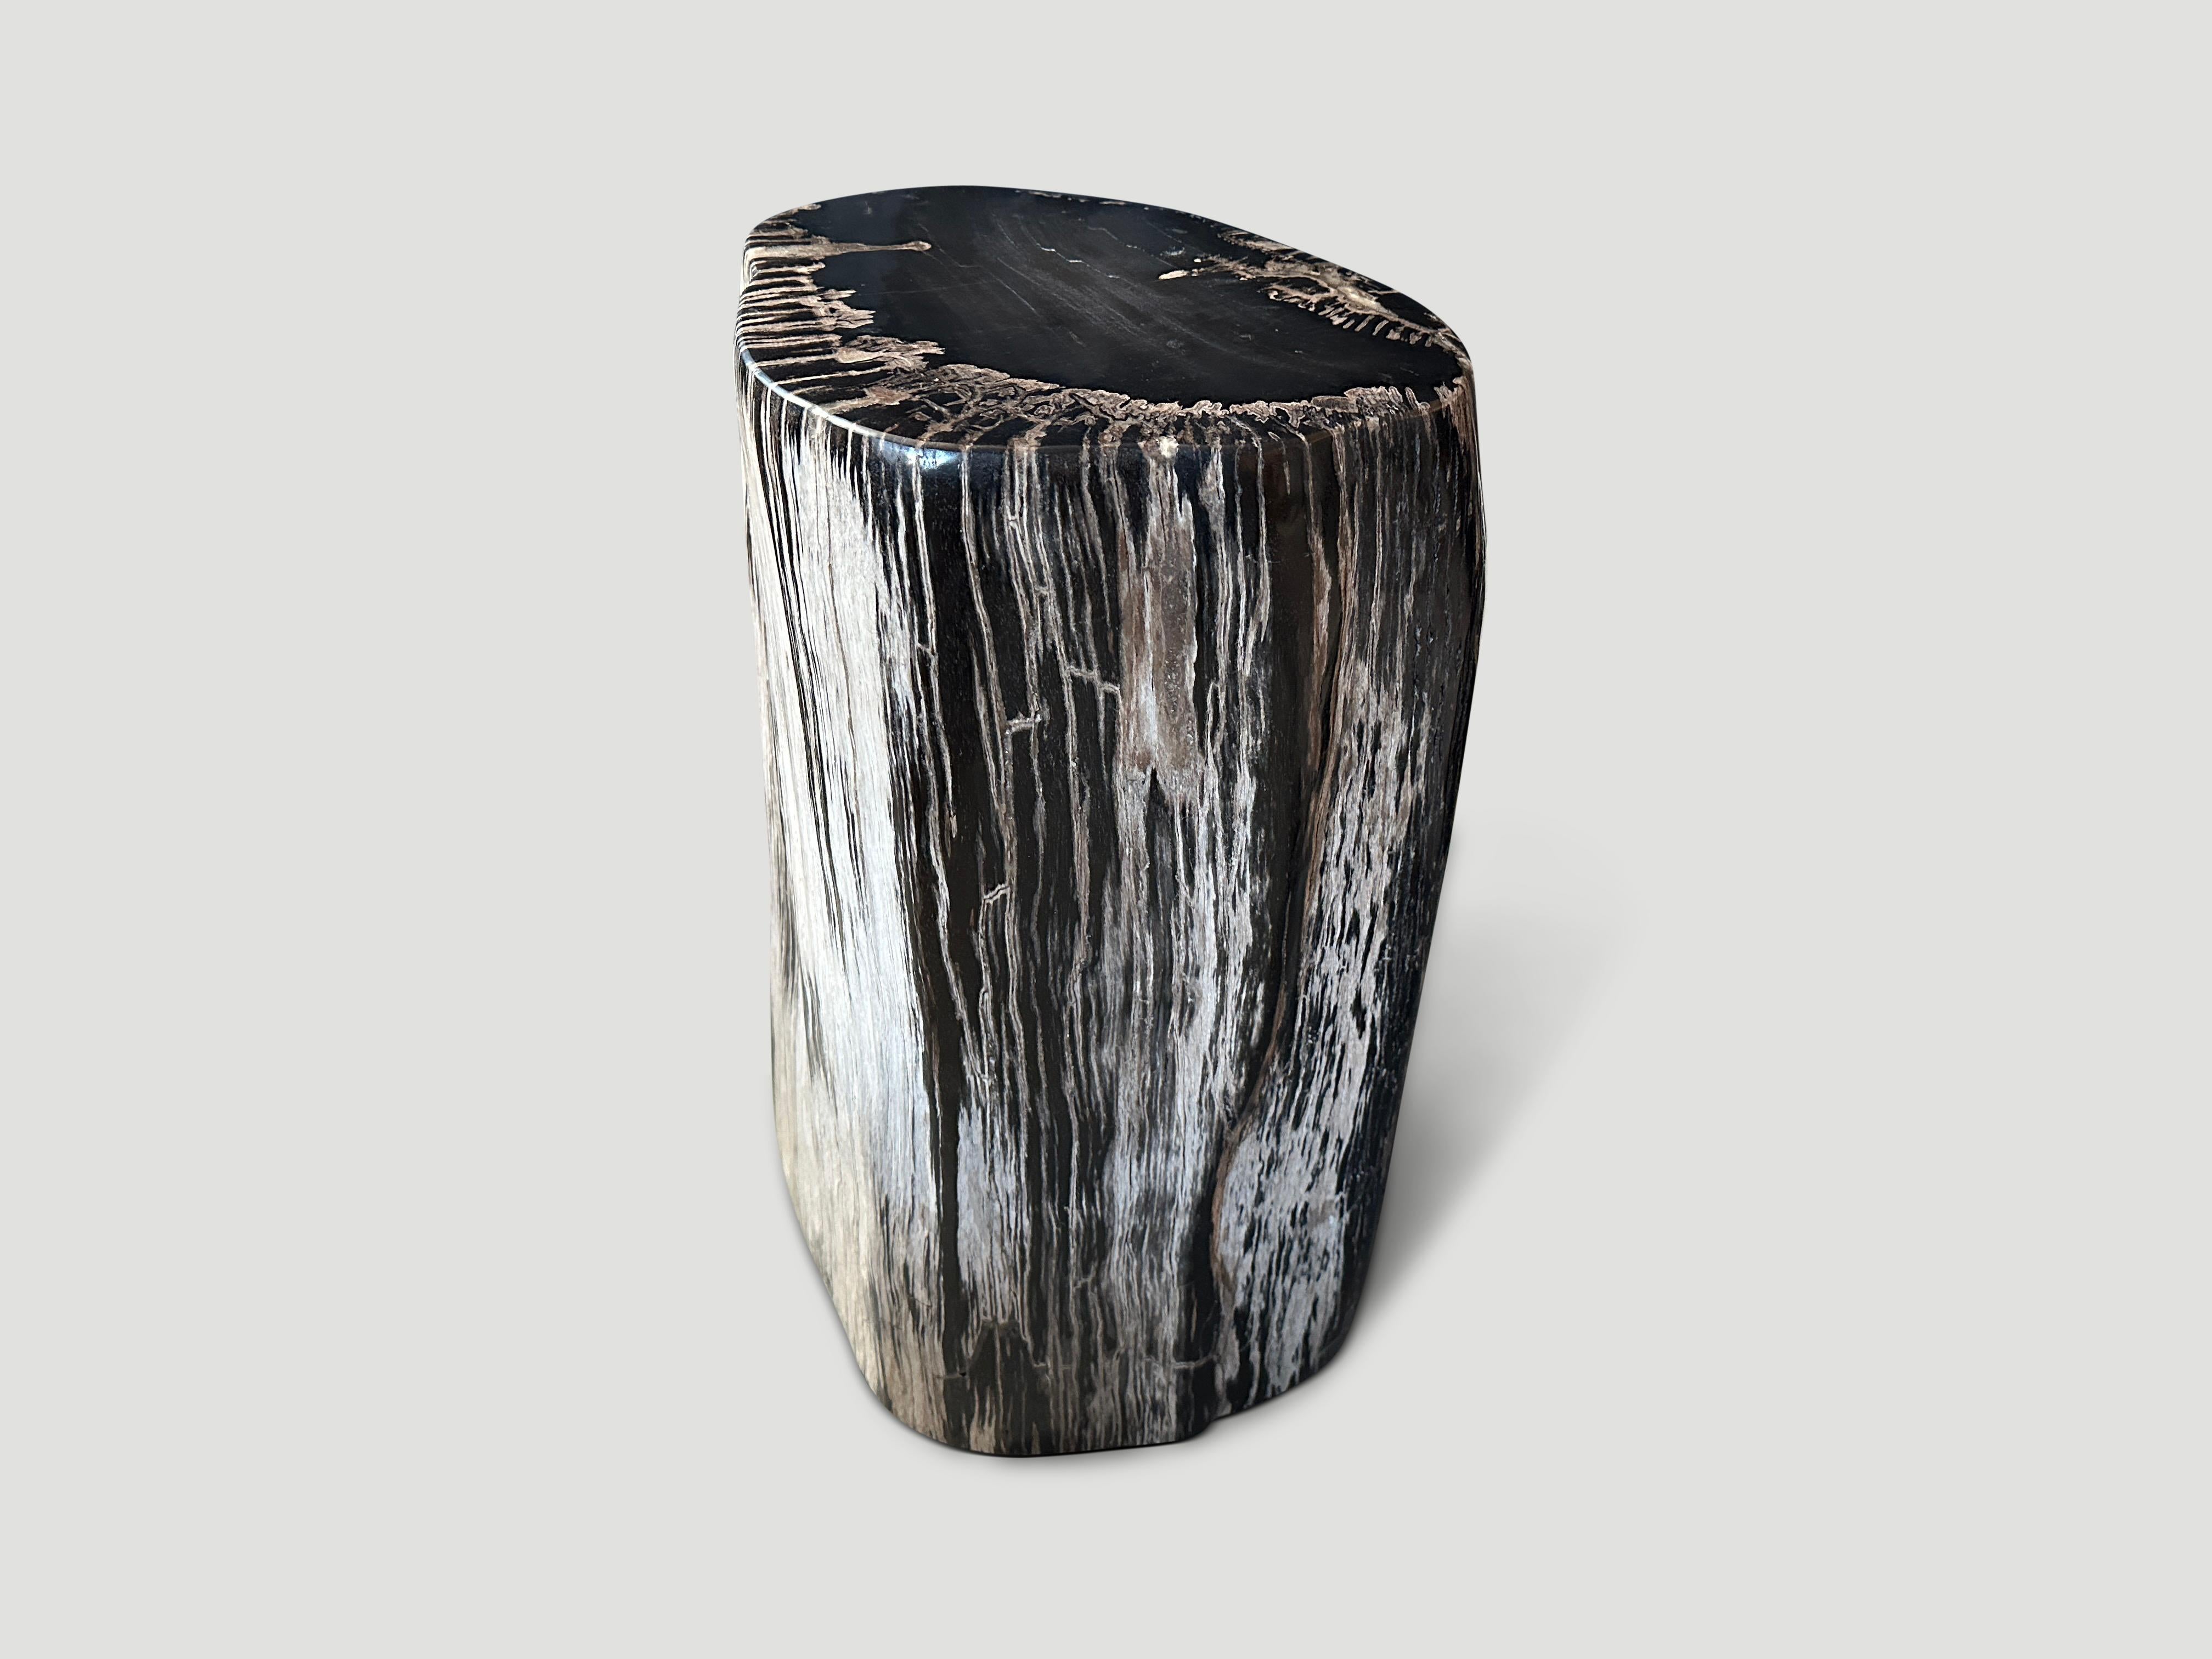 Organic Modern Andrianna Shamaris Black and White Petrified Wood Side Table or Pedestal For Sale